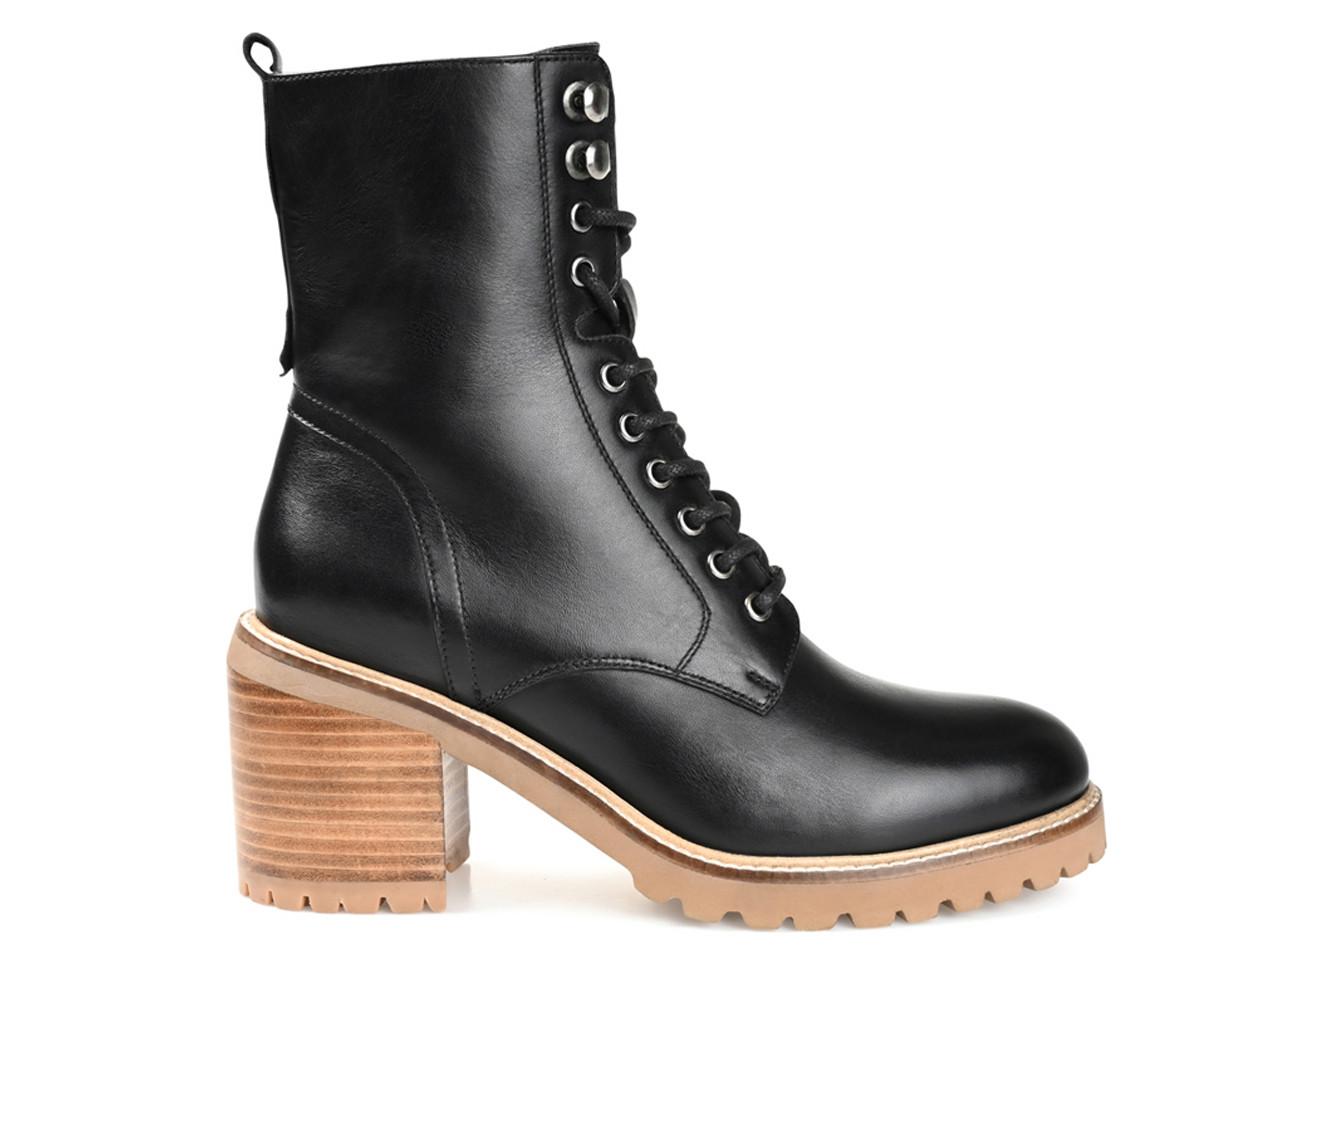 Women's Journee Signature Malle Heeled Lace Up Boots